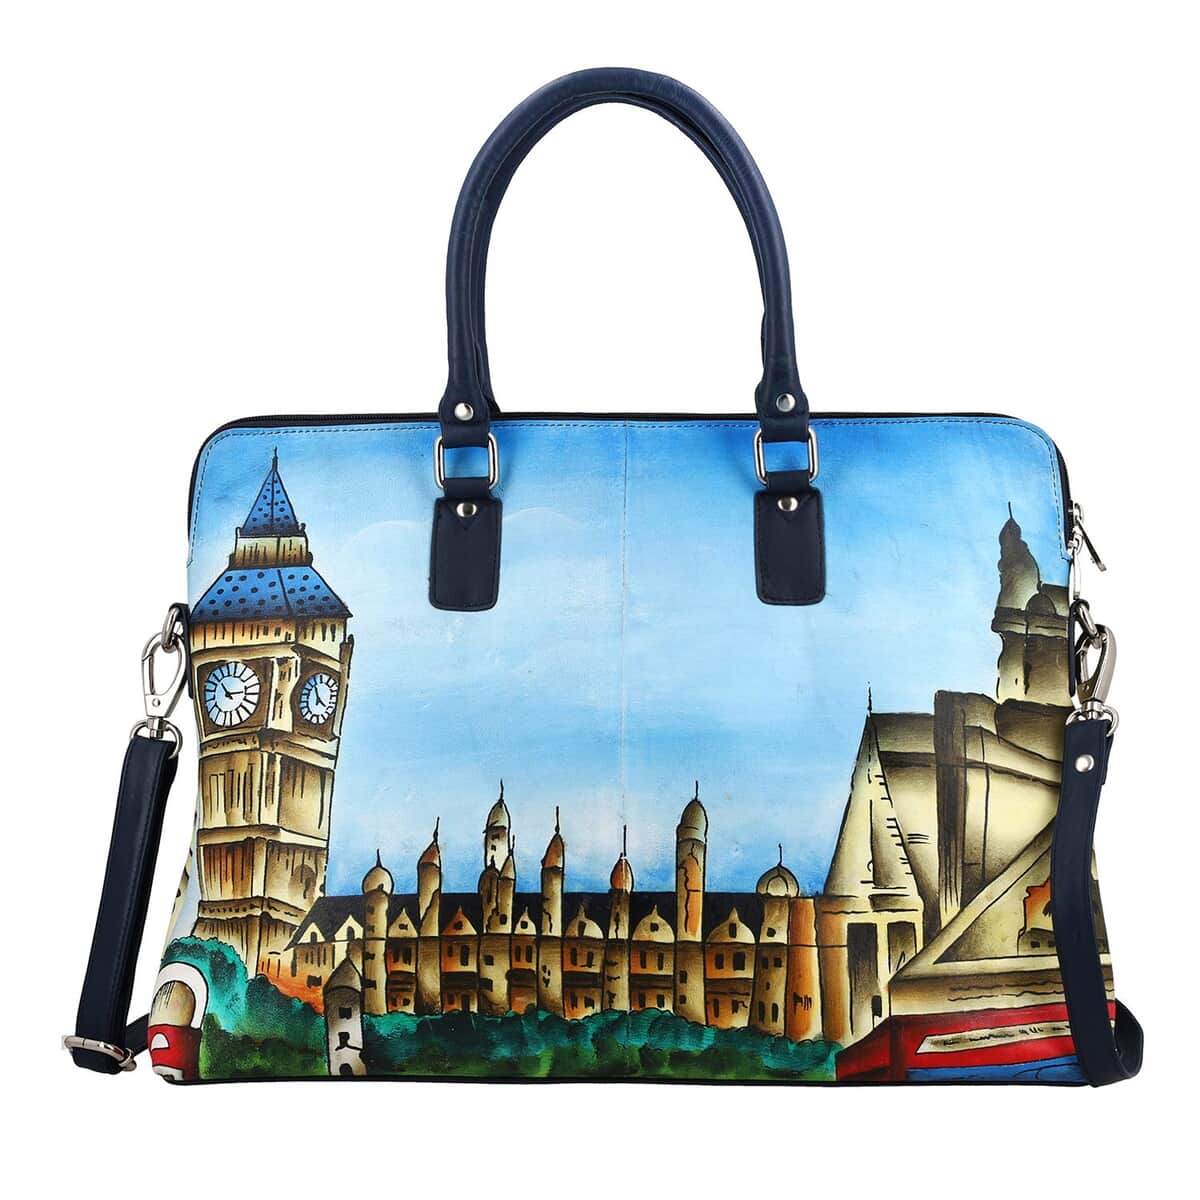 "SUKRITI 100% Genuine Leather Ladies Shoulder Tote Bag (Theme: London City Clock Tower View) Color: Blue Size: 16.5(L)x12.5(H)x3(W) inches" image number 0